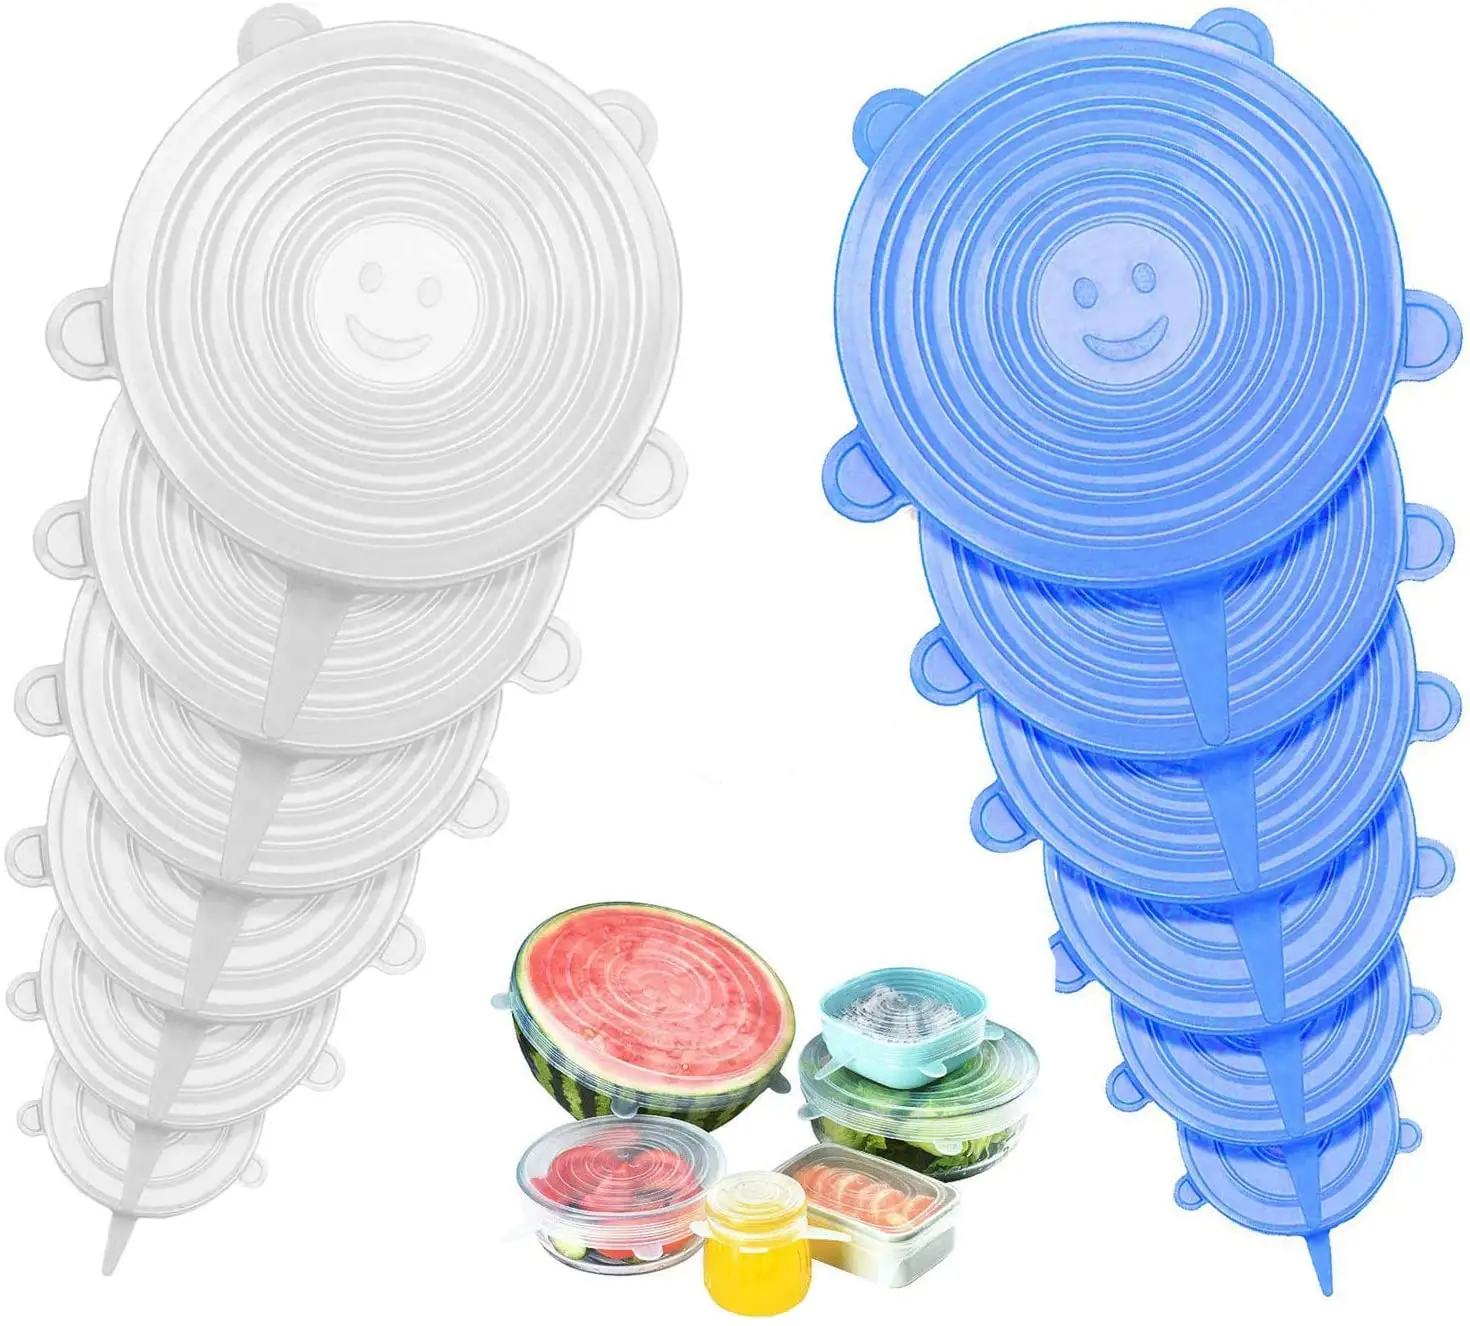 Hot sale reusable elastic silicon stretch lid 12 set, silicone food cover stretchable food wrap